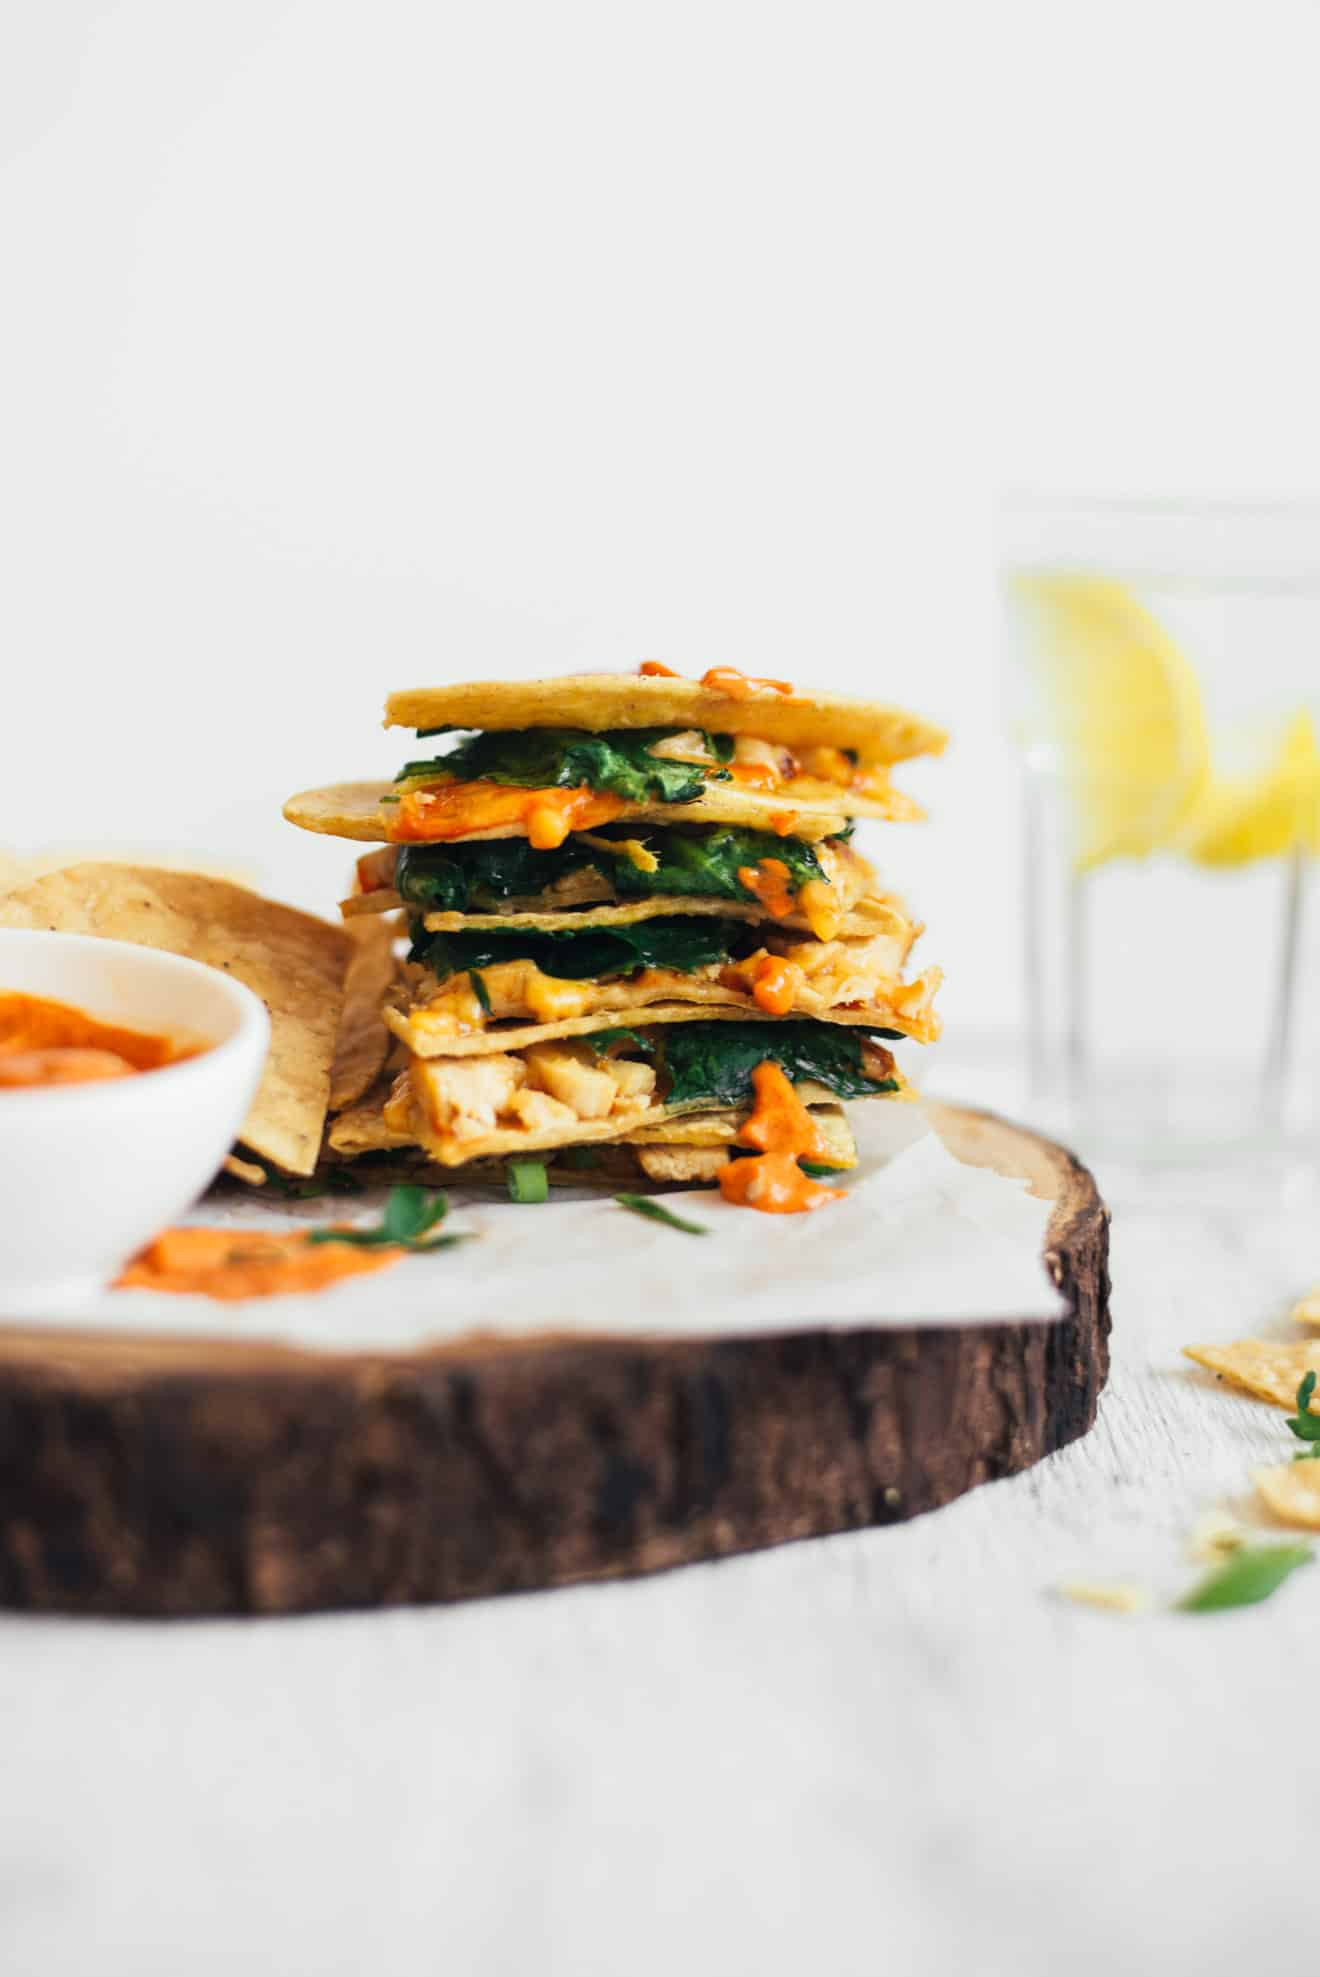 Chicken Quesadillas with Gochujang Sauce - easy gluten free meal in under 30 minutes!